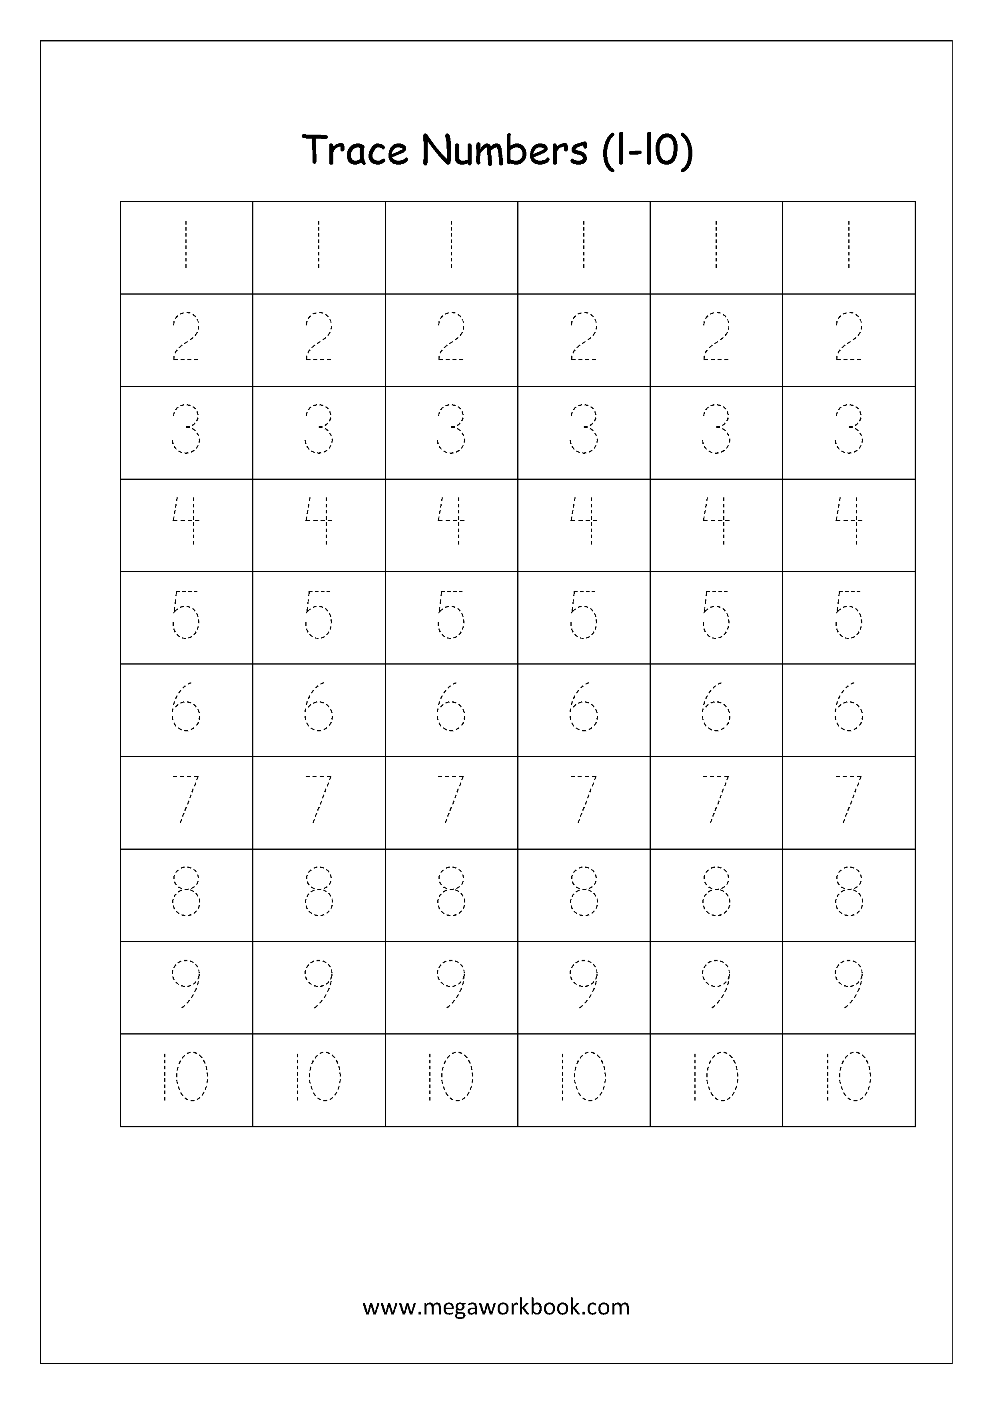 Free Math Worksheets - Number Tracing And Writing (1-10